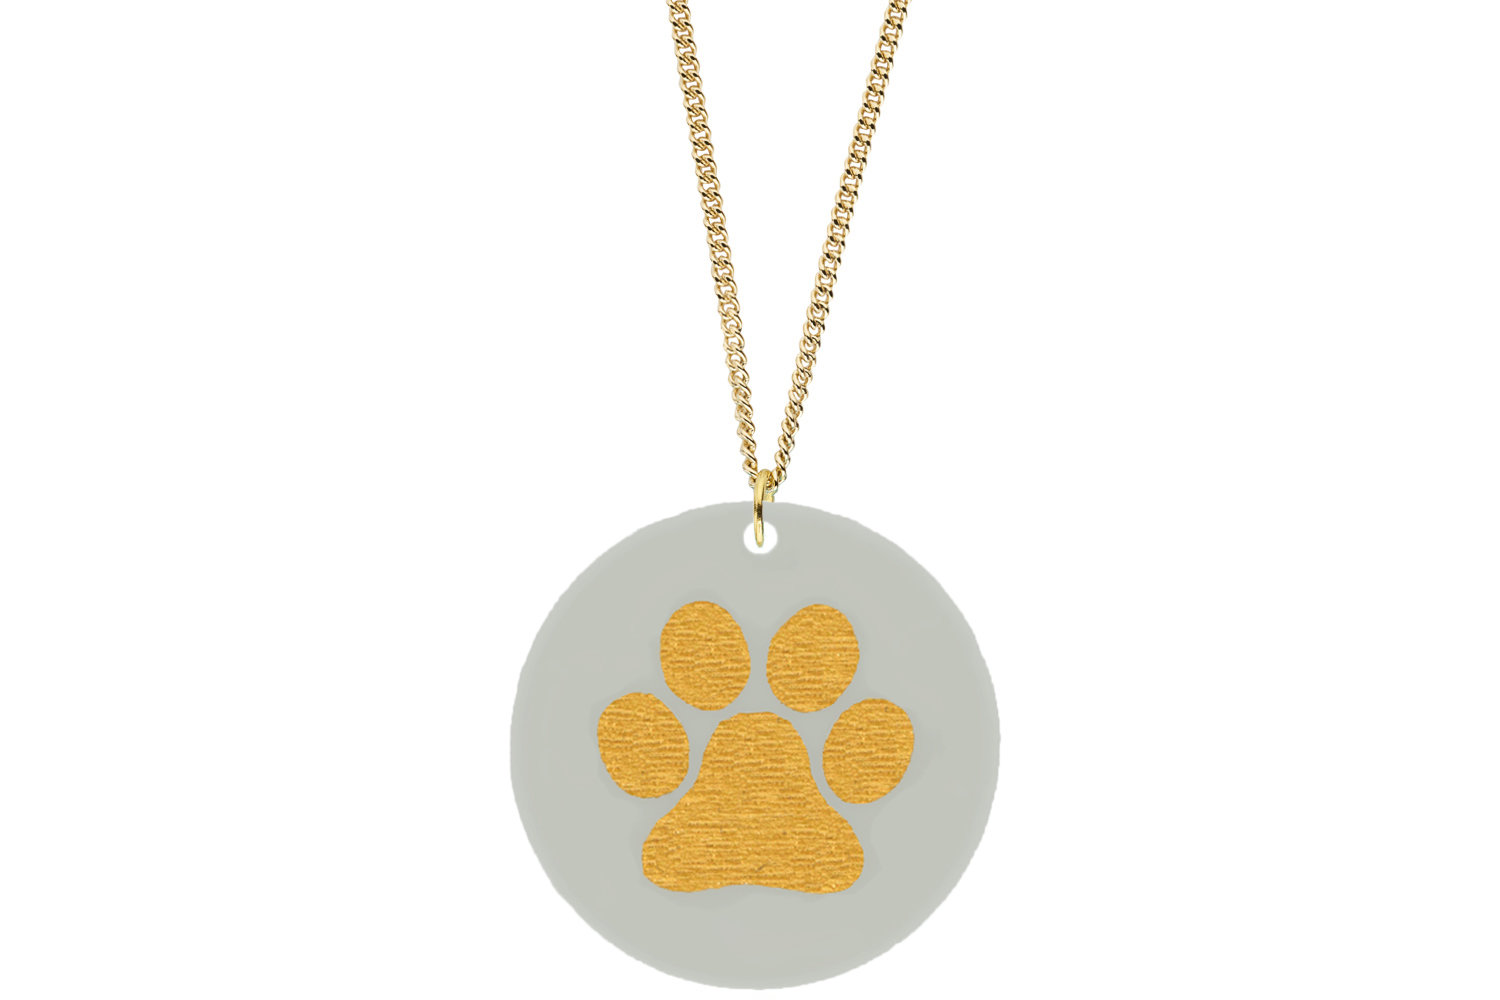 Dog Paw Print Pendant Subtle Style Refined with Paint on Chain Necklace